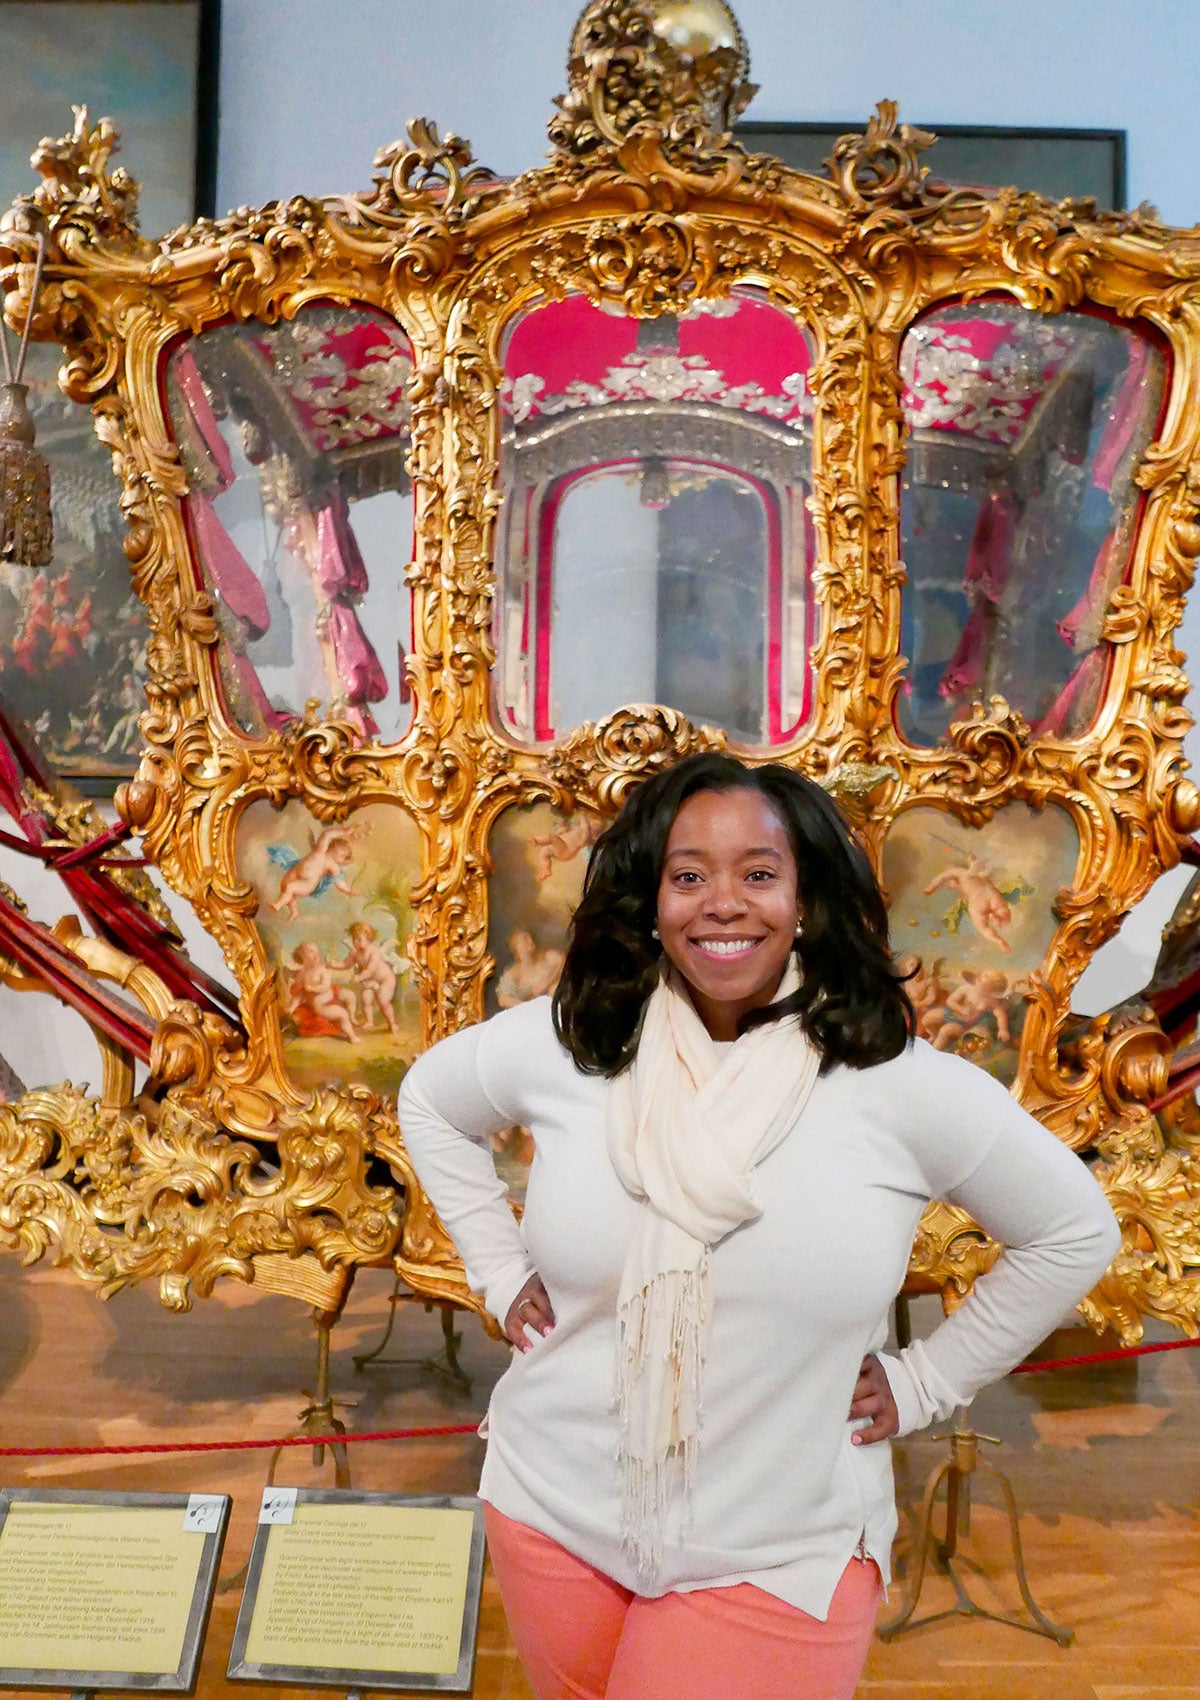 3 Single Black Women Living Abroad Reveal What It's Like to Date in the UAE, Europe and More
